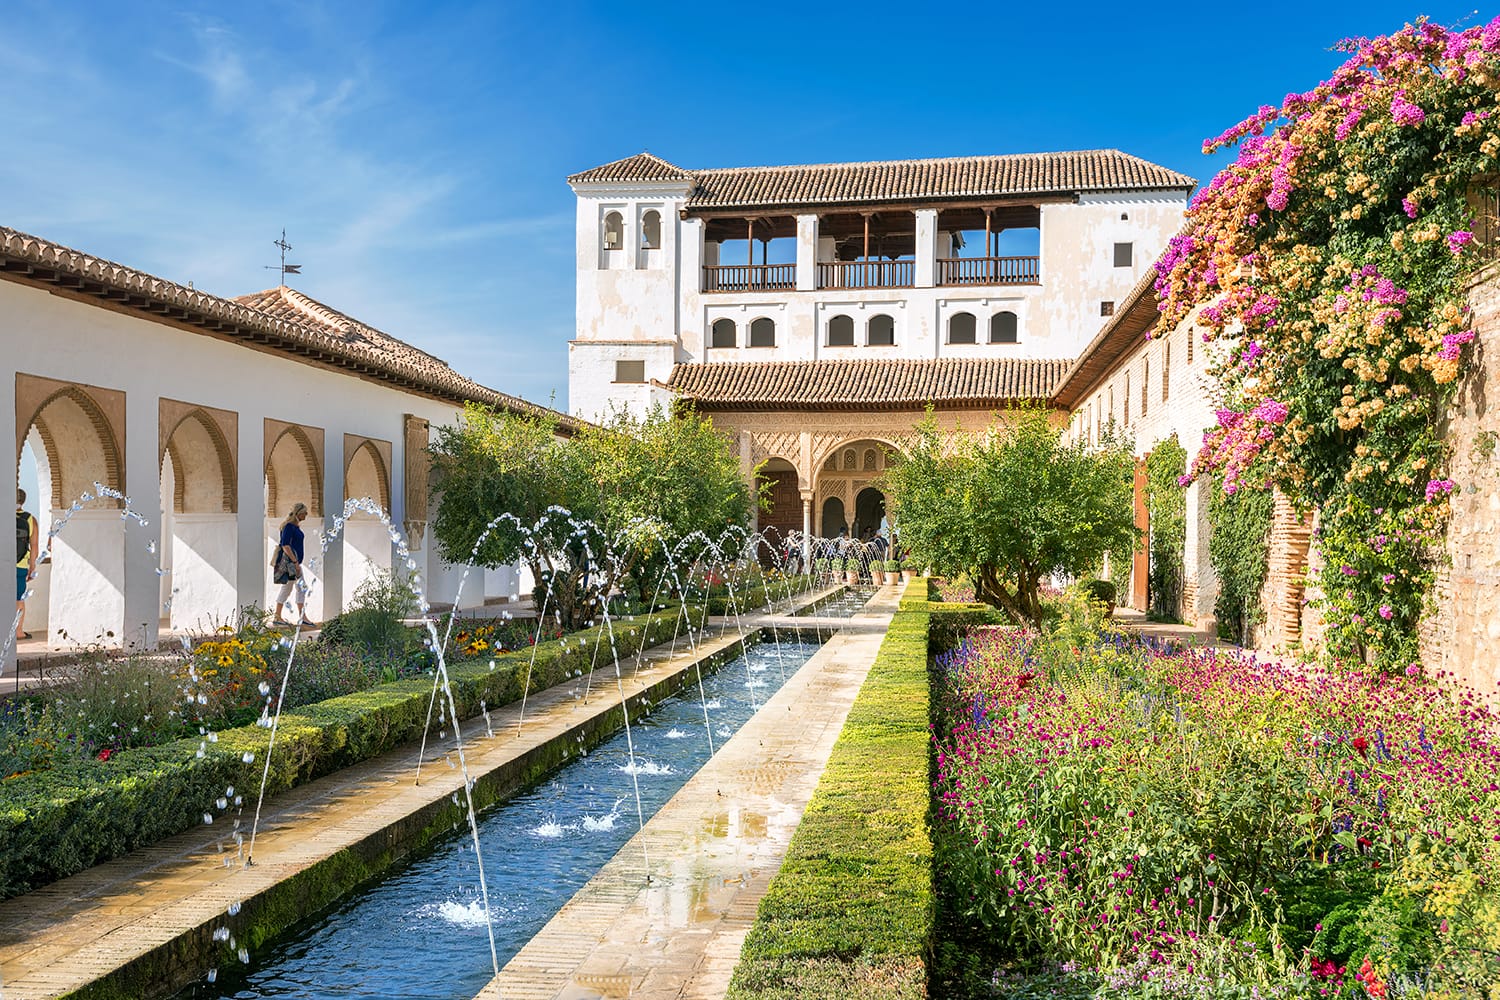 View of Generalife courtyard with fountain in Alhambra palace. Granada, Andalusia, Spain